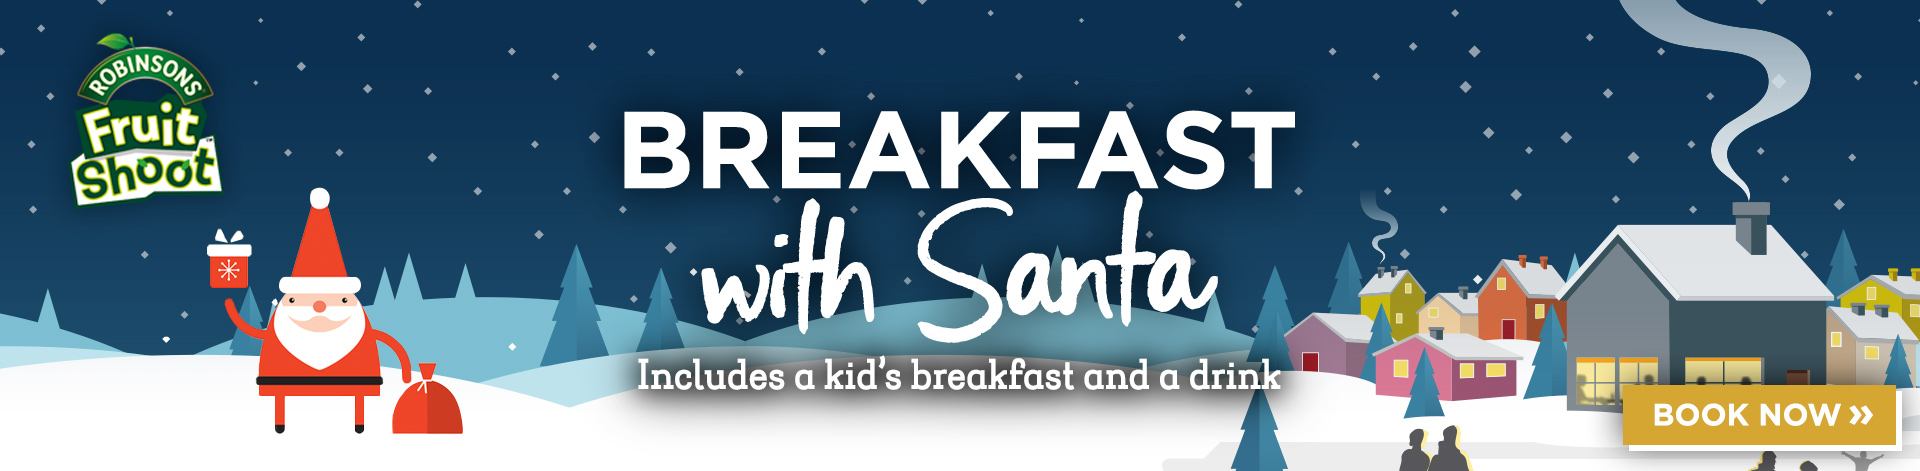 Breakfast with Santa menu at The Red Lion